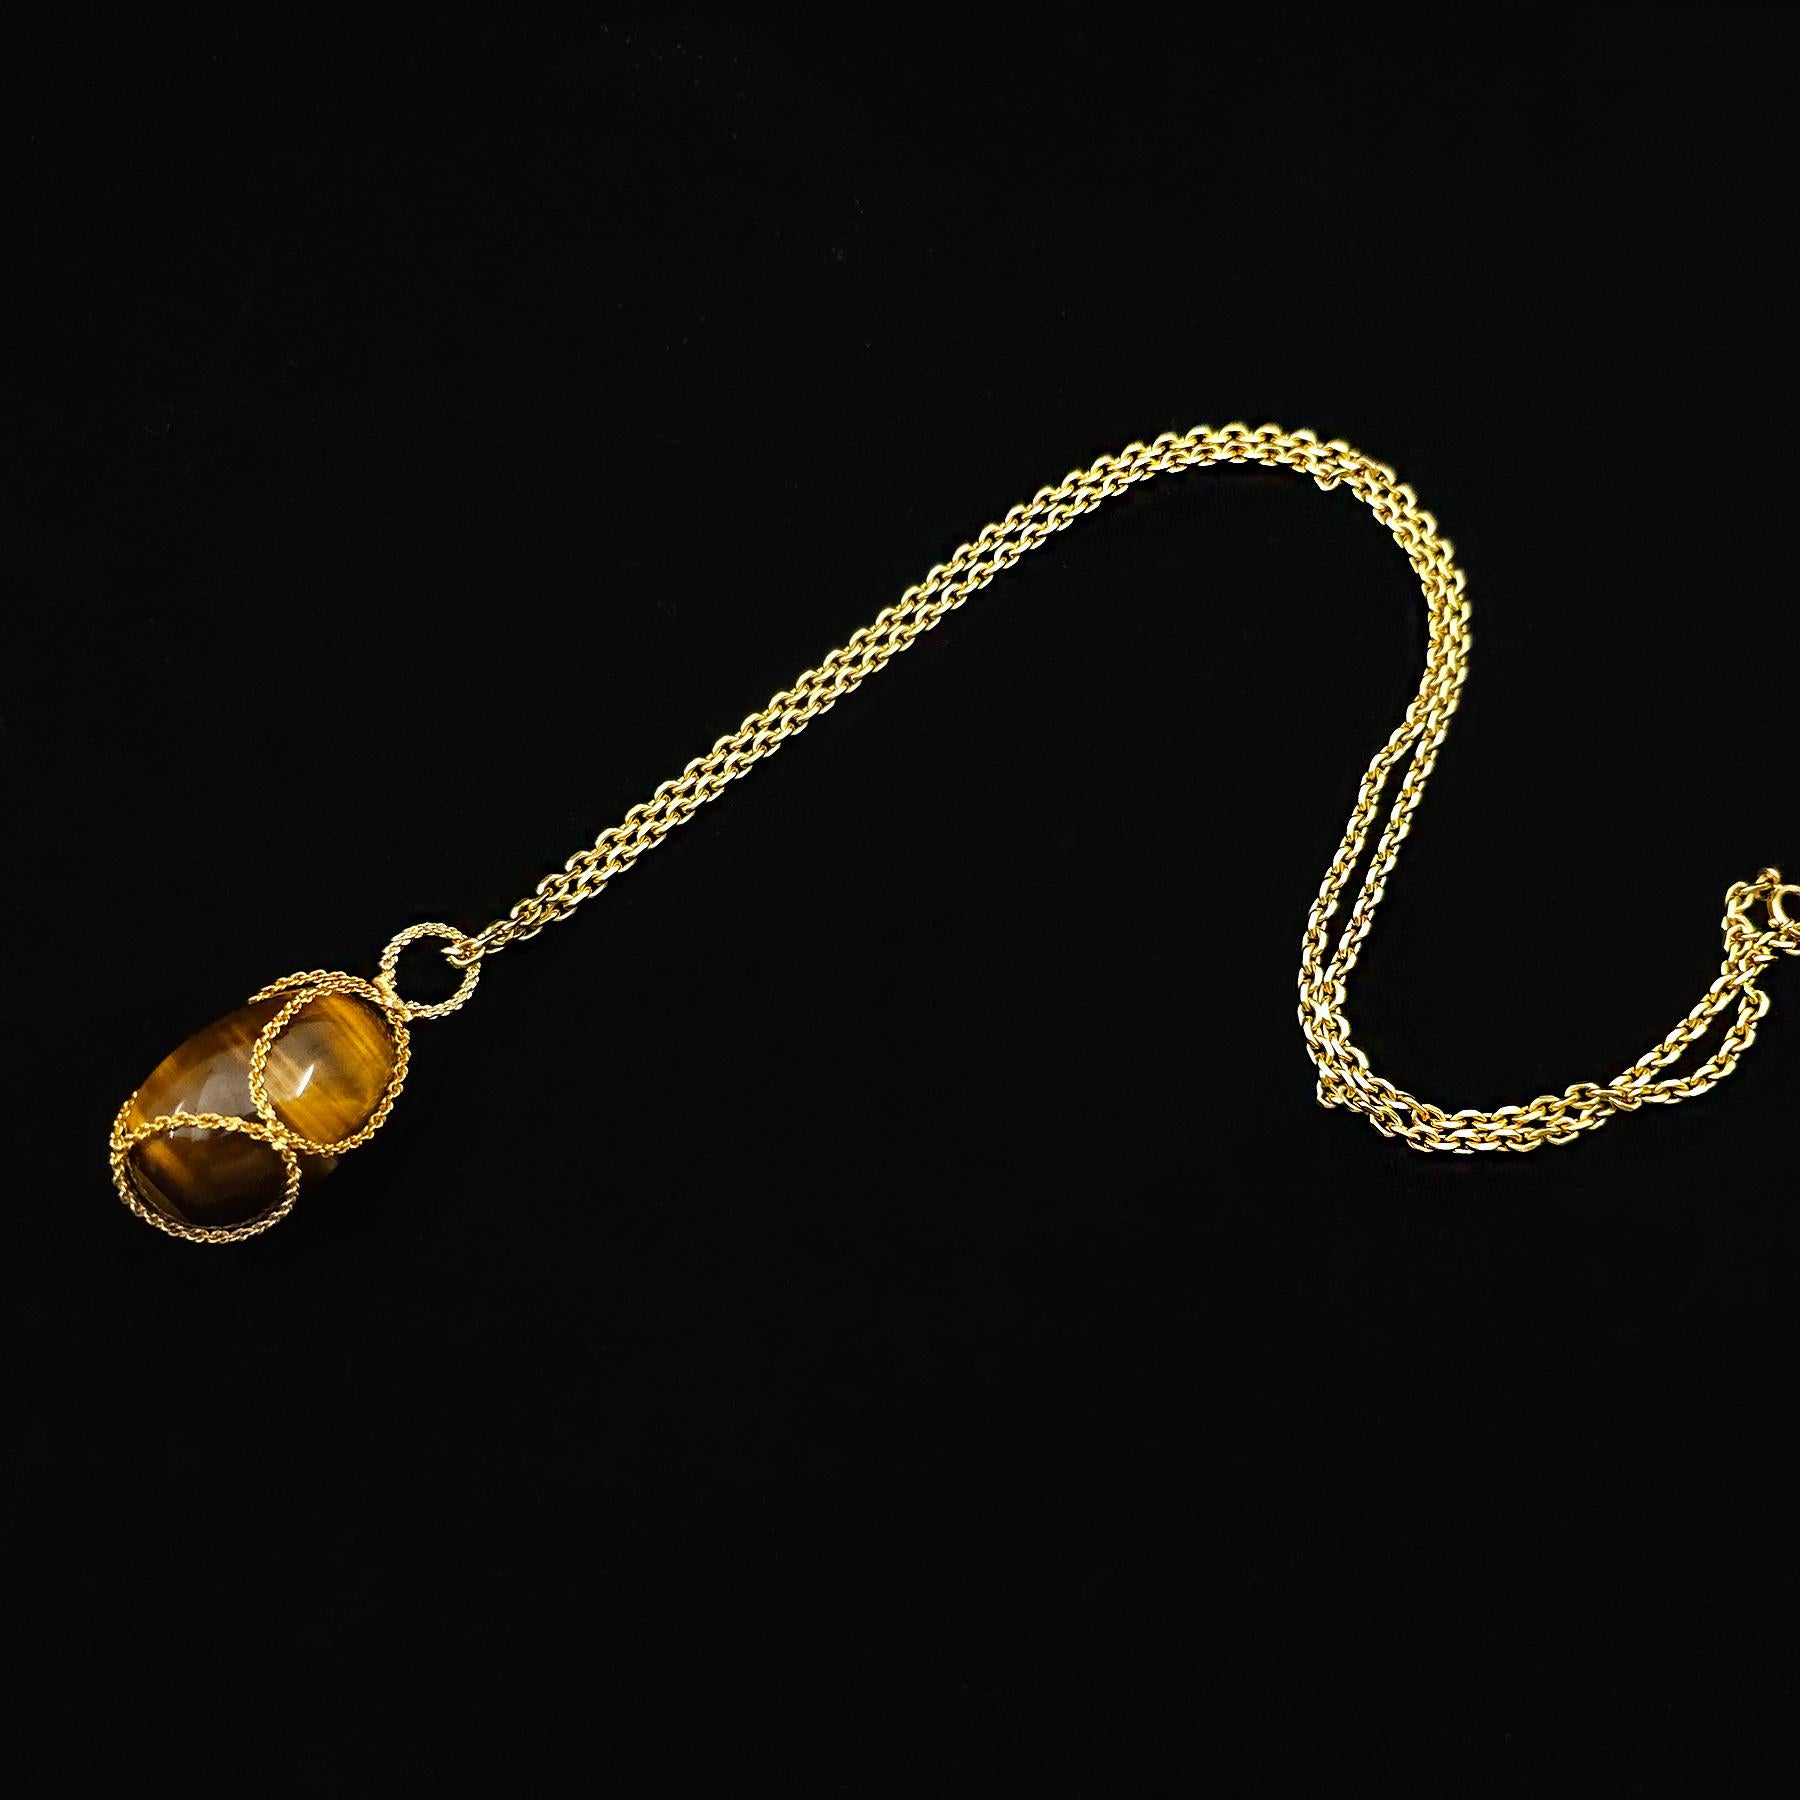 A Tiger’s eye and 18 karat gold egg pendant. (Chain not included)

This bold and captivating pendant features a large polished tiger’s eye egg suspended within a basket of rope textured 18 karat gold. The egg fits securely in the basket but also